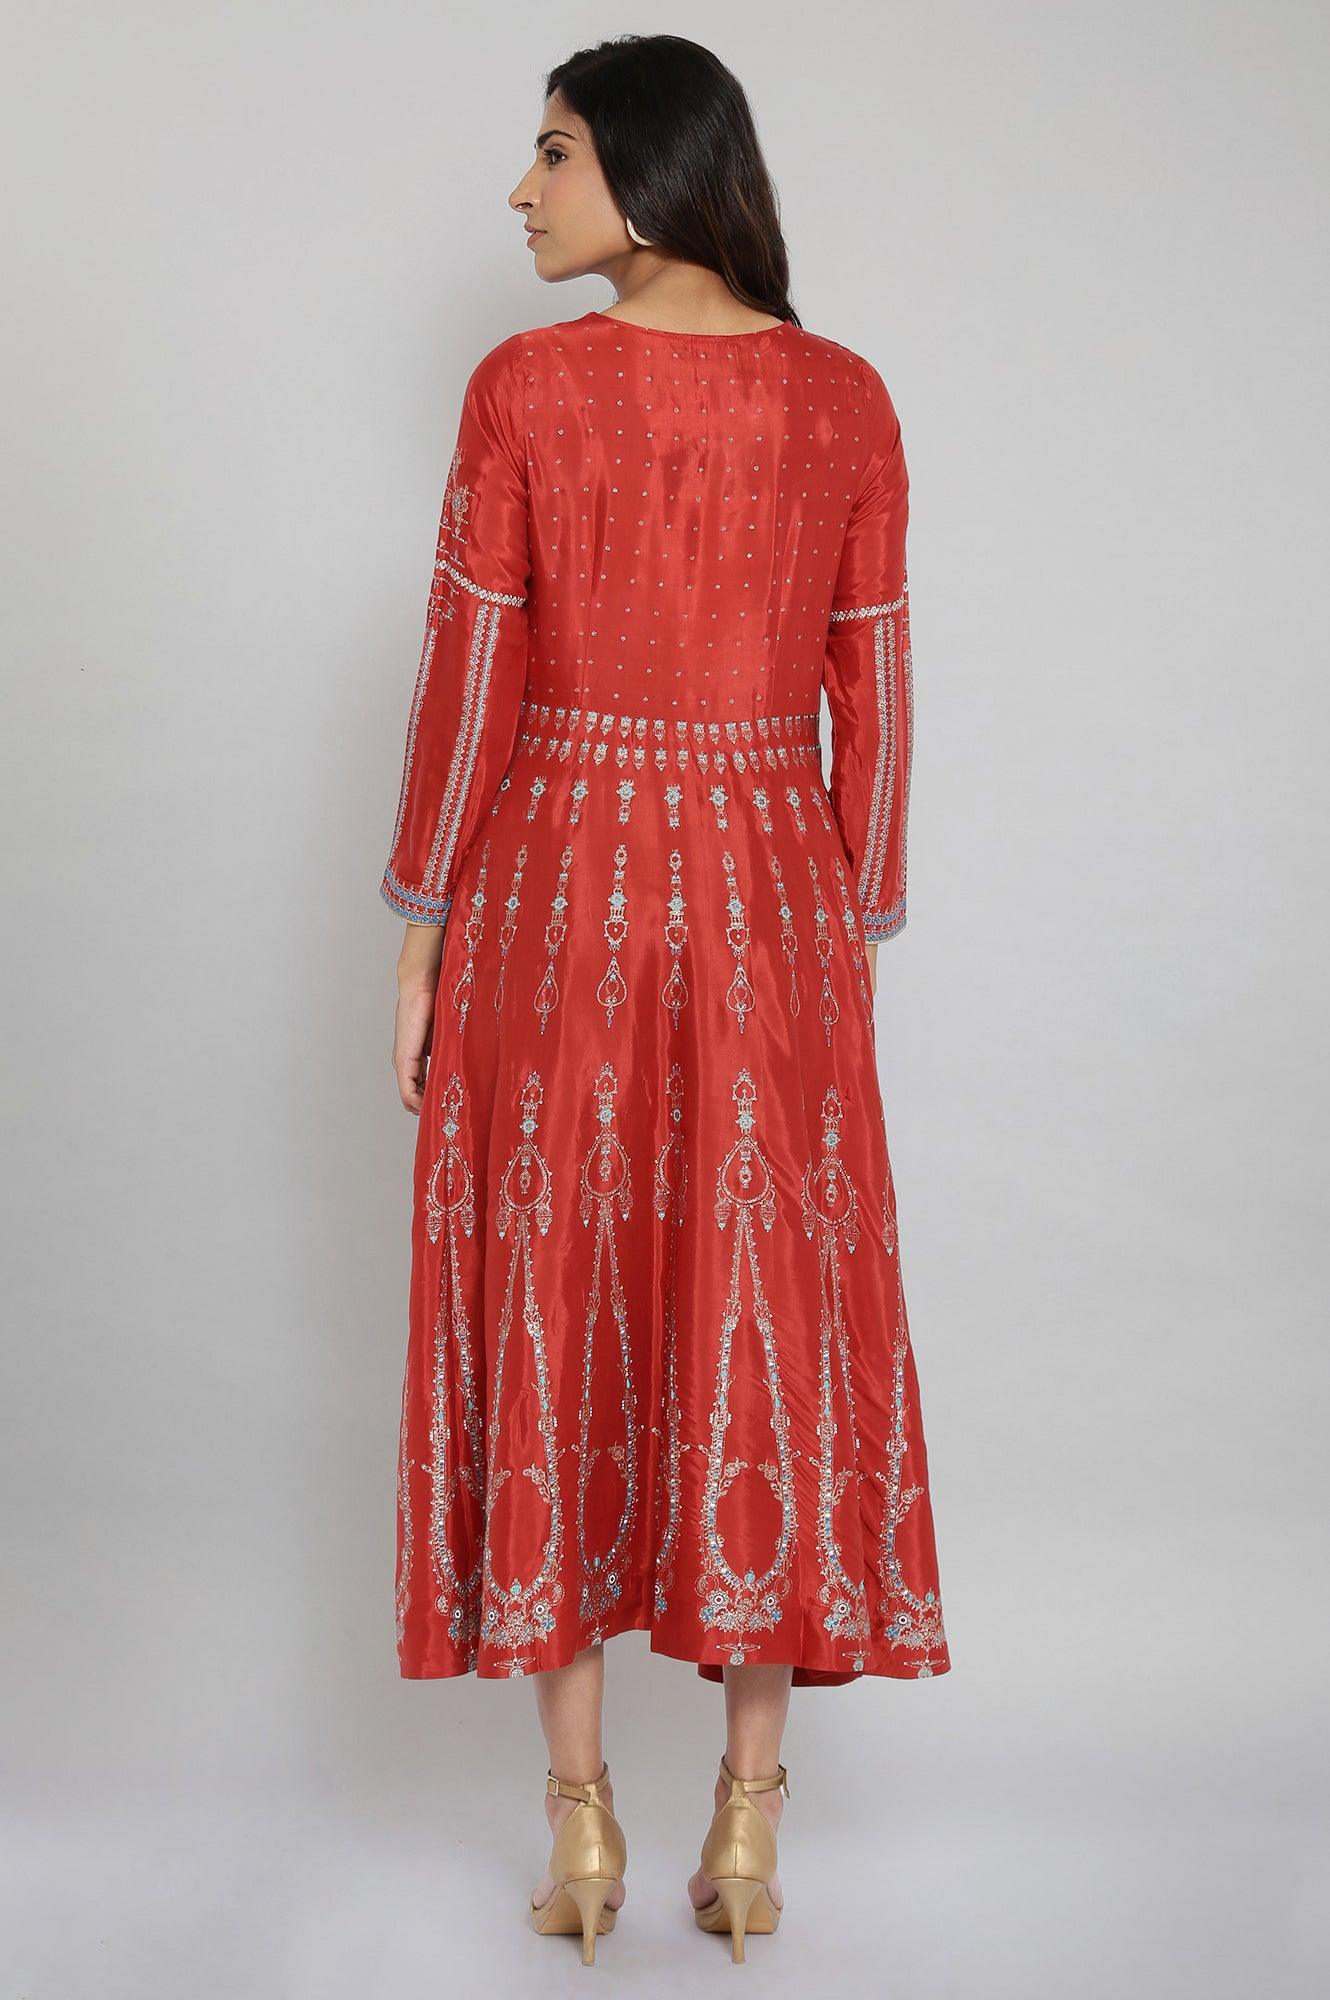 Rust Red Printed Dress with Embroidery - wforwoman